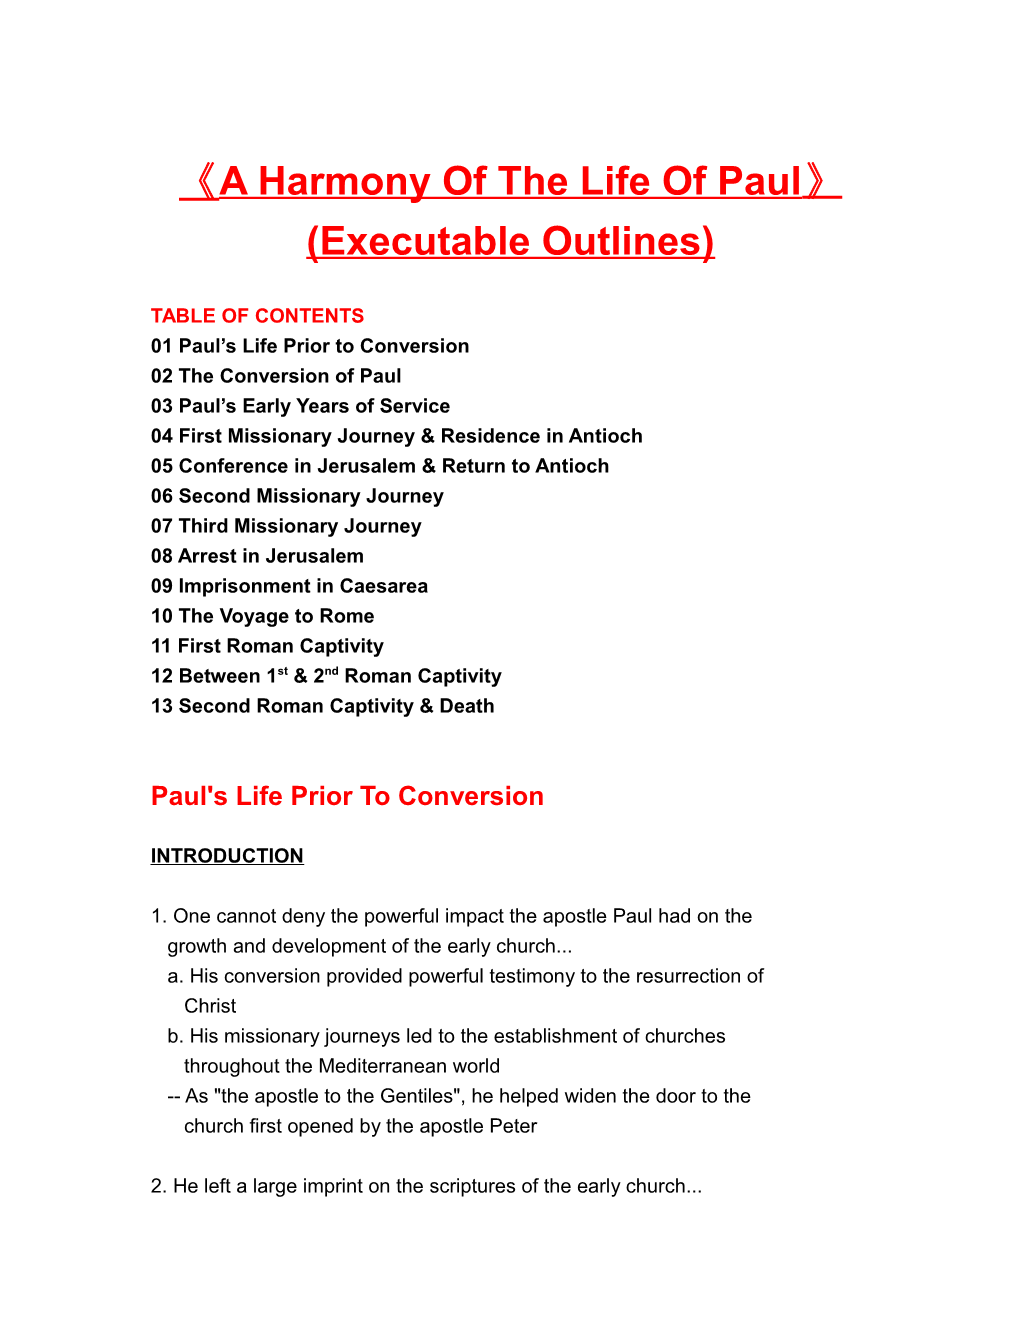 A Harmony of the Life of Paul (Executable Outlines)